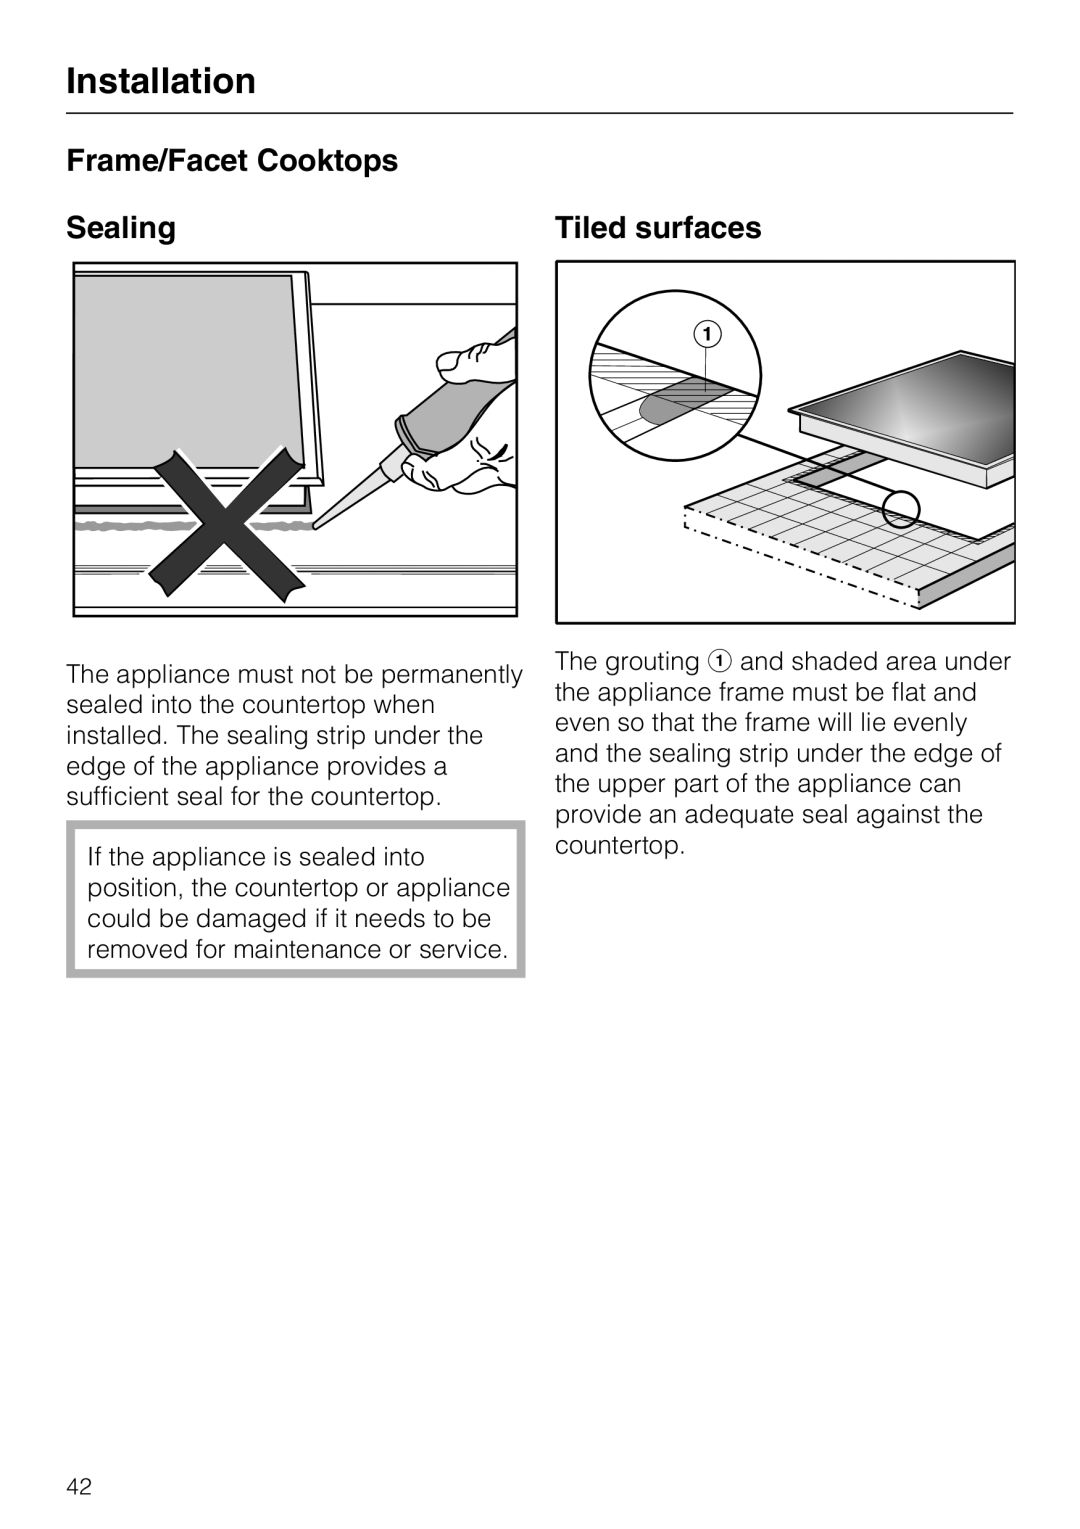 Miele KM 5820 installation instructions Frame/Facet Cooktops, Sealing, Tiled surfaces, Installation 